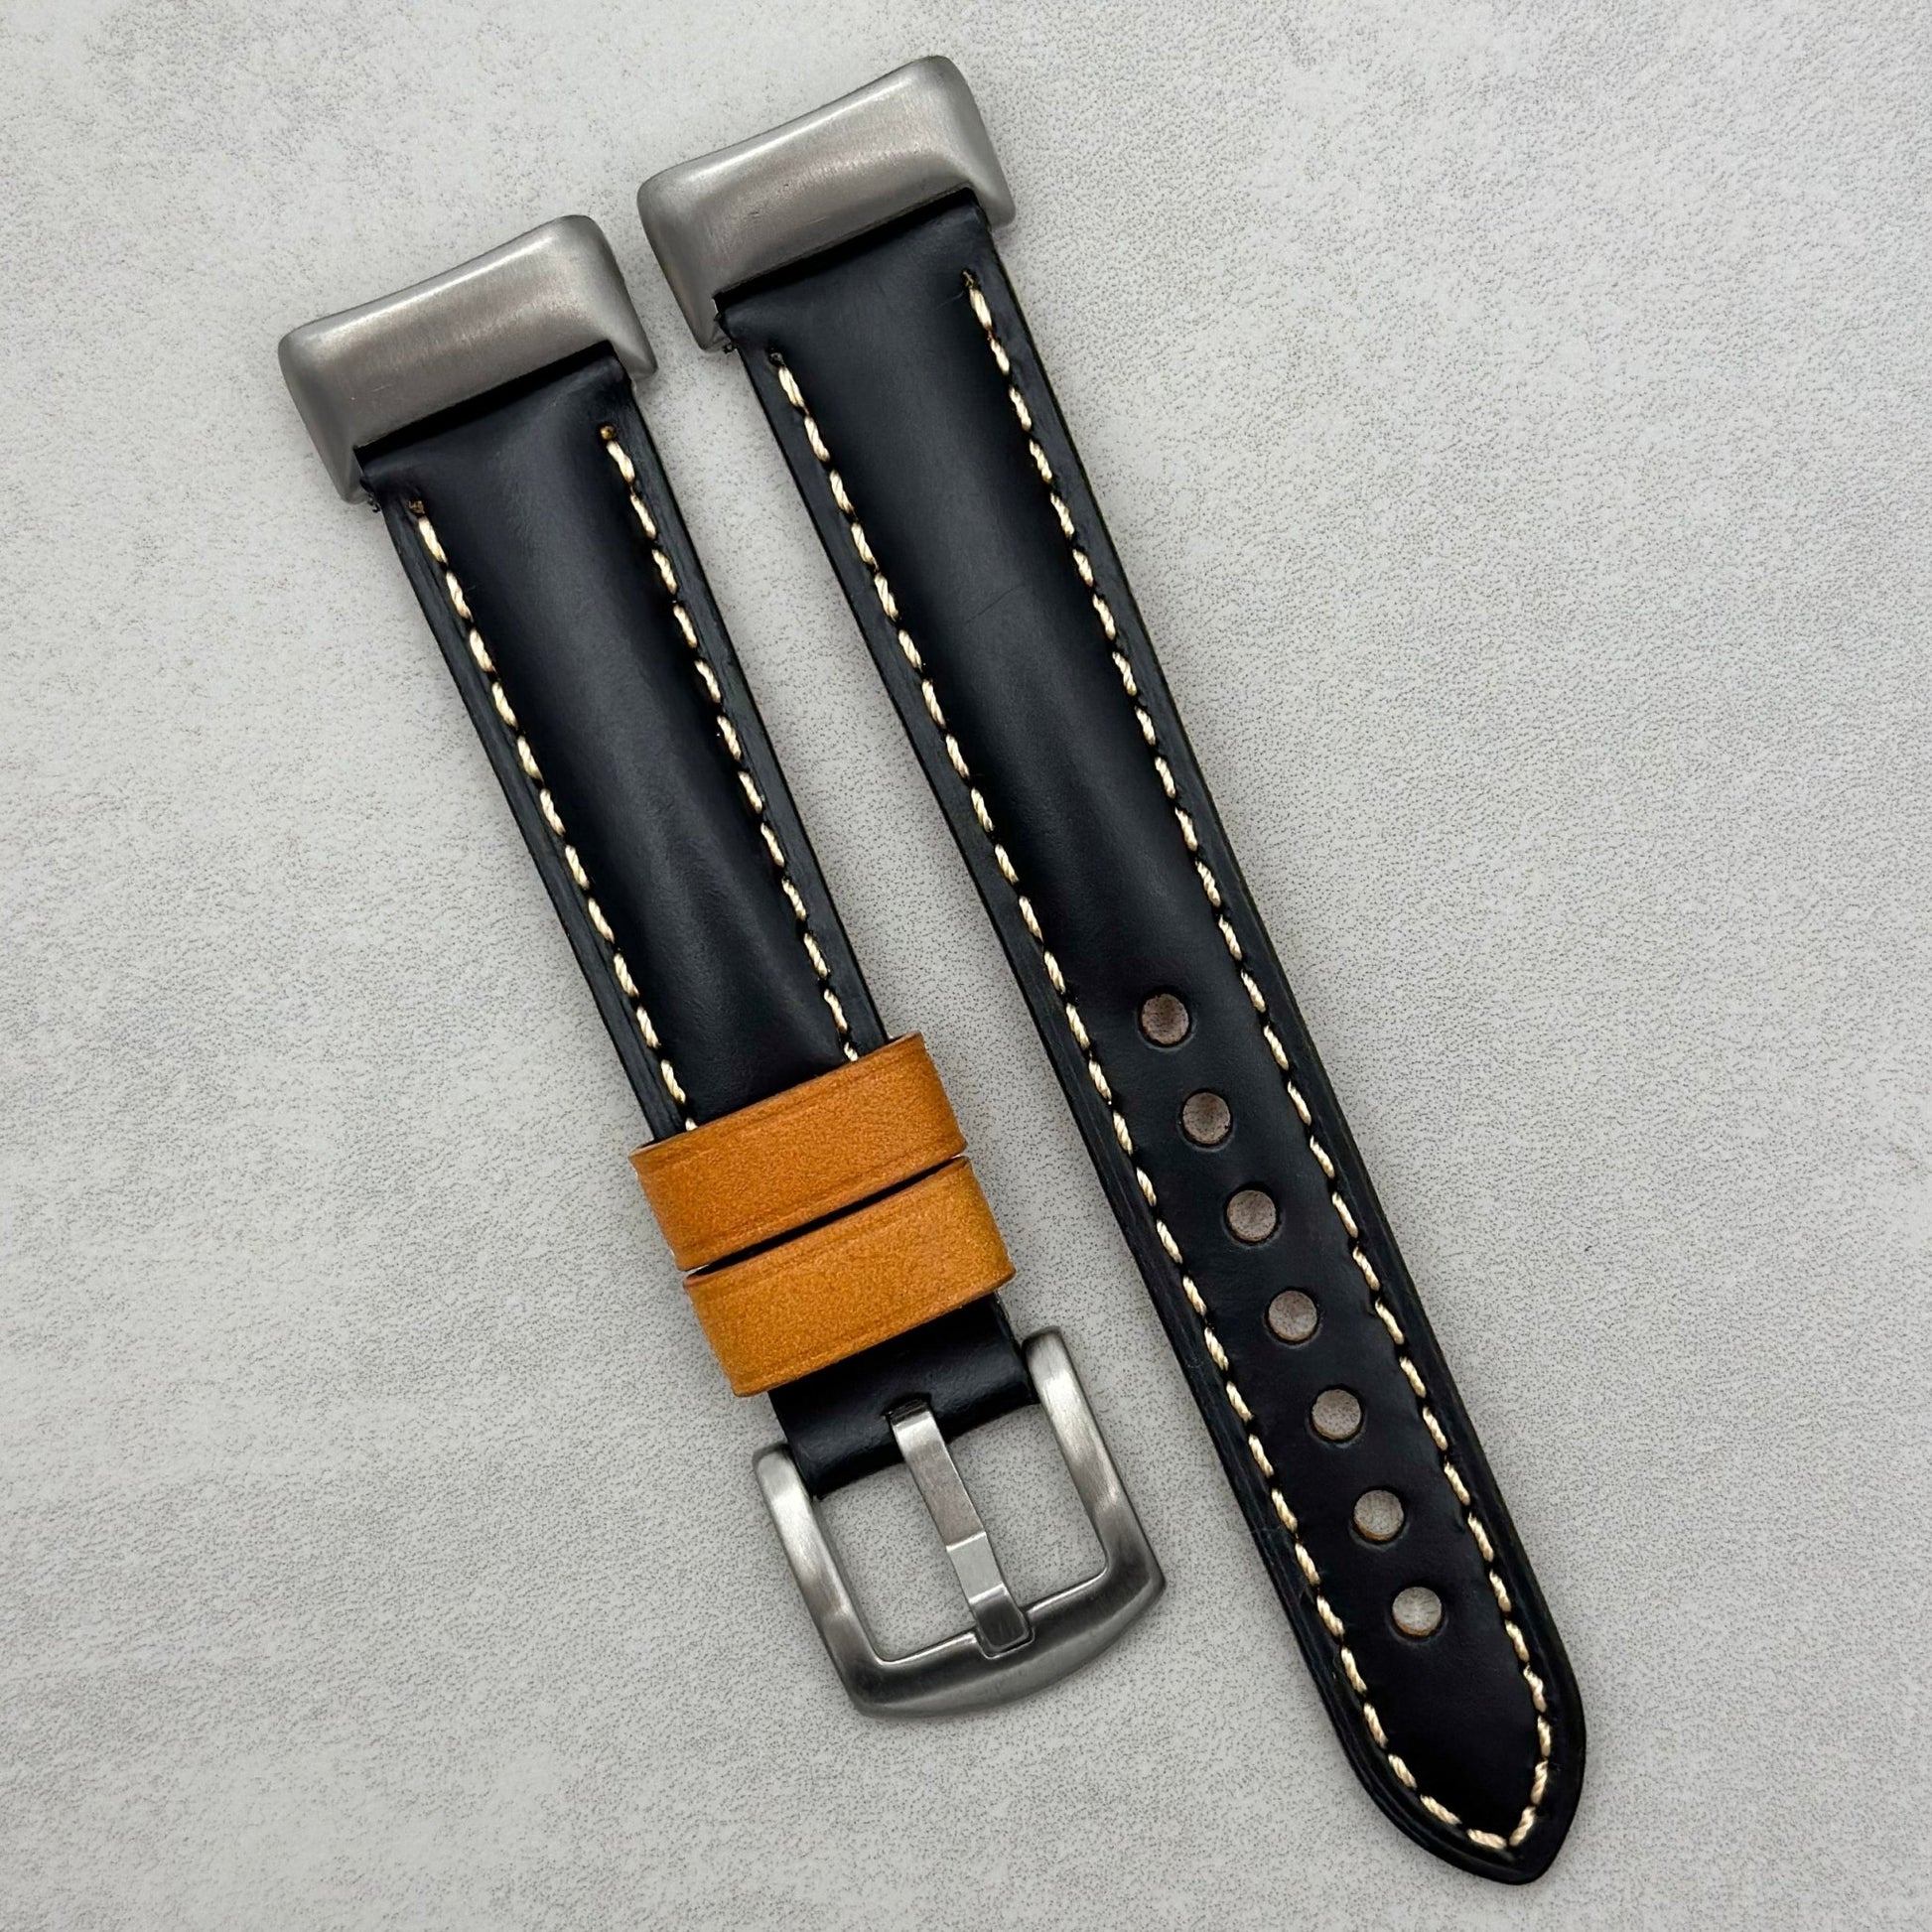 Oxford jet black calf skin Fitbit Charge watch strap. Fitbit Charge 1, 2, 3, 4, 5, 6. Full Grain Leather. Watch And Strap.